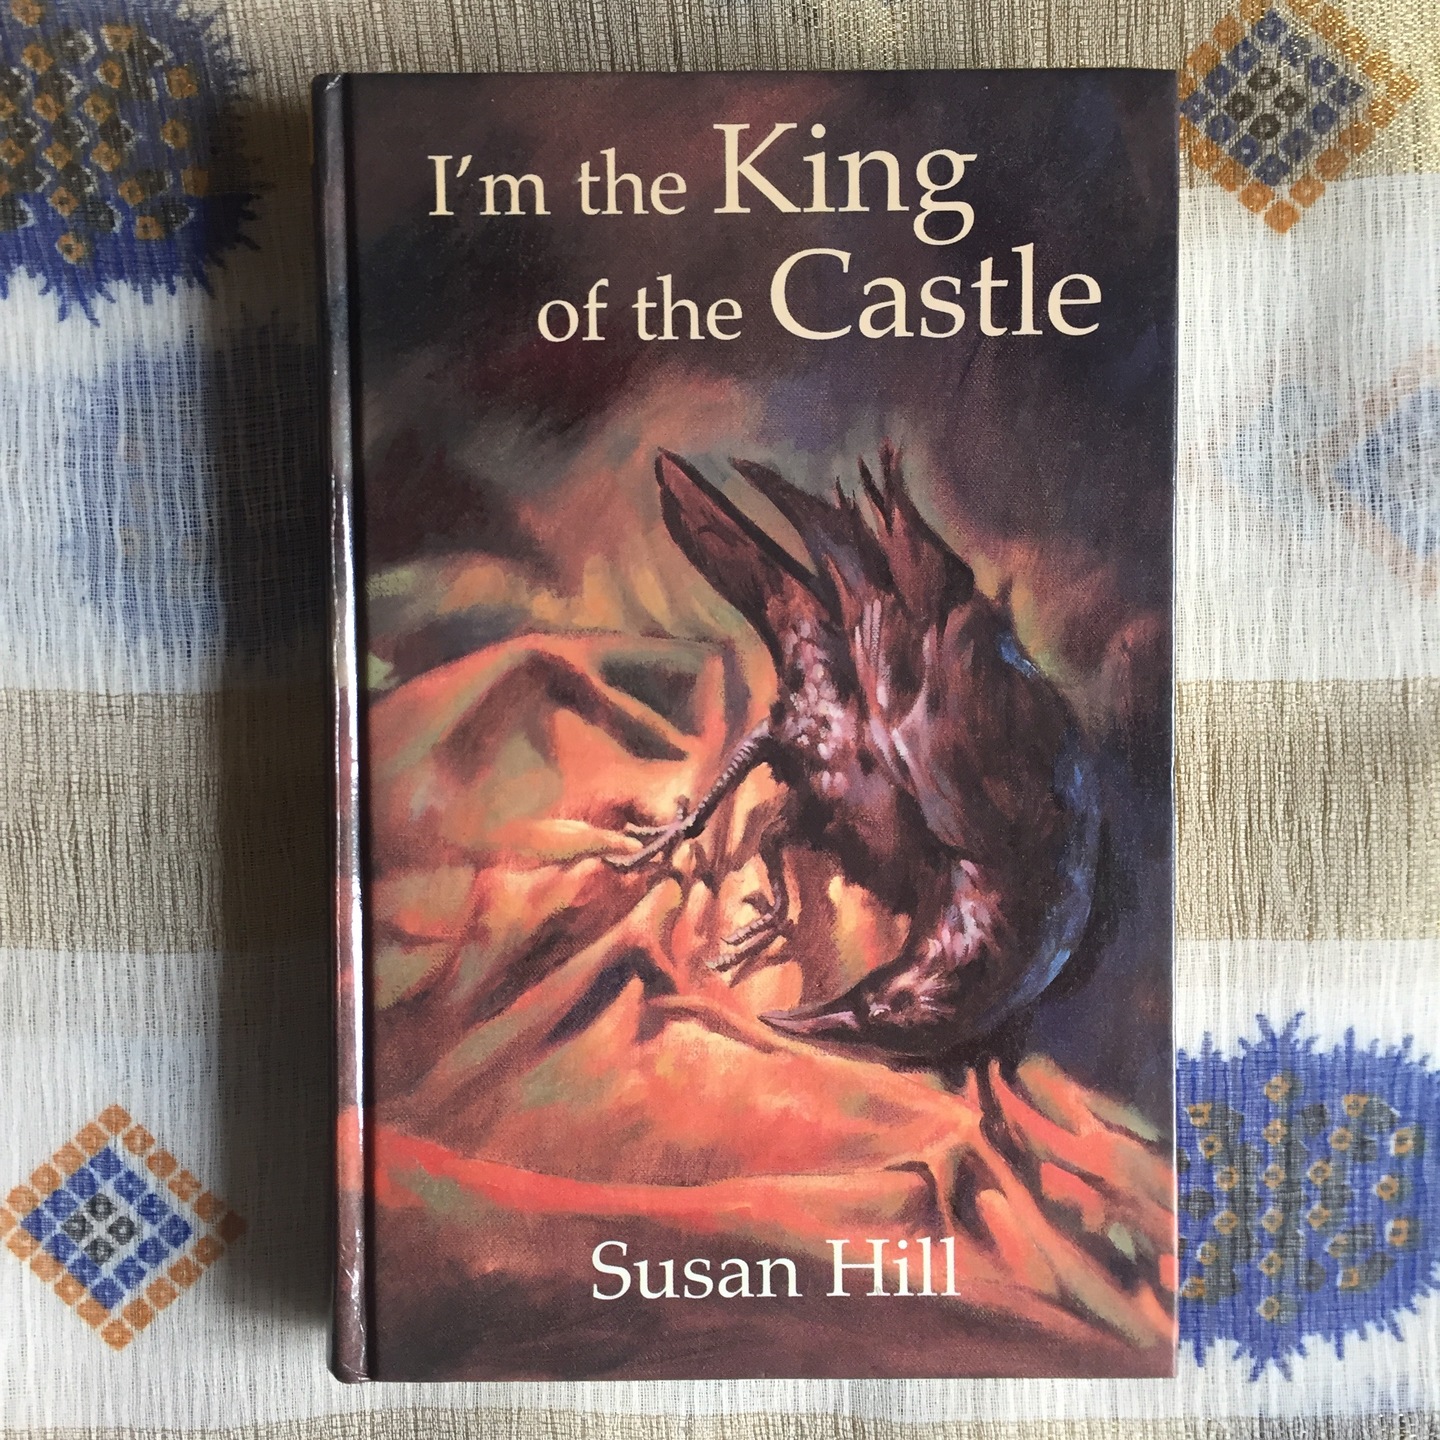 I'm the King of the Castle by Susan Hill [Hardcover]